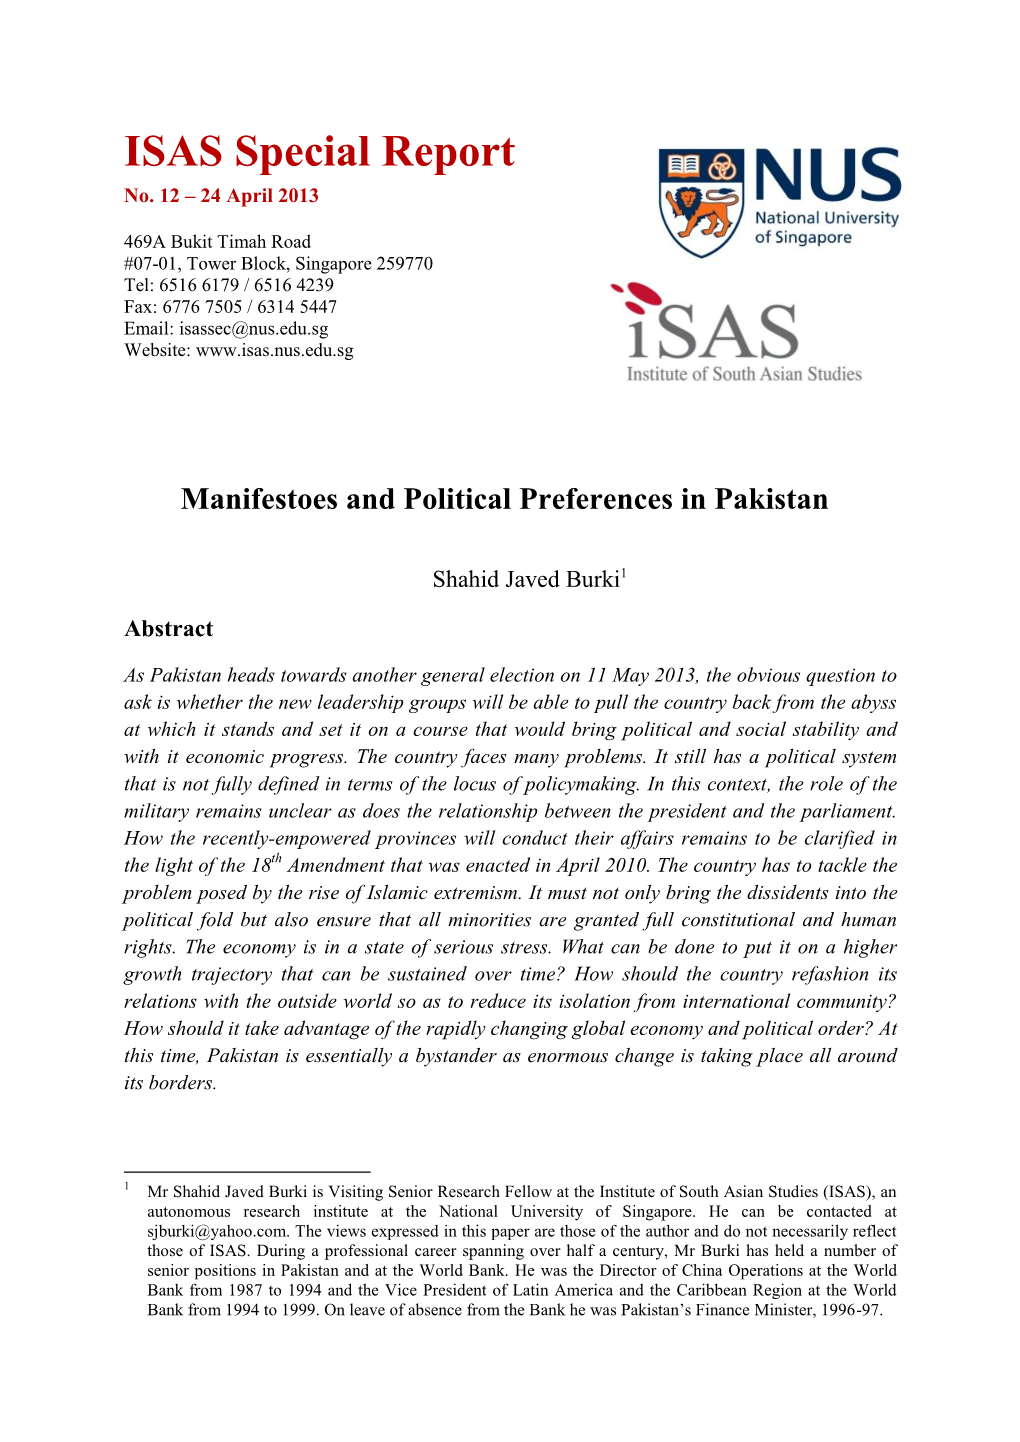 Manifestos and Political Preferences in Pakistan